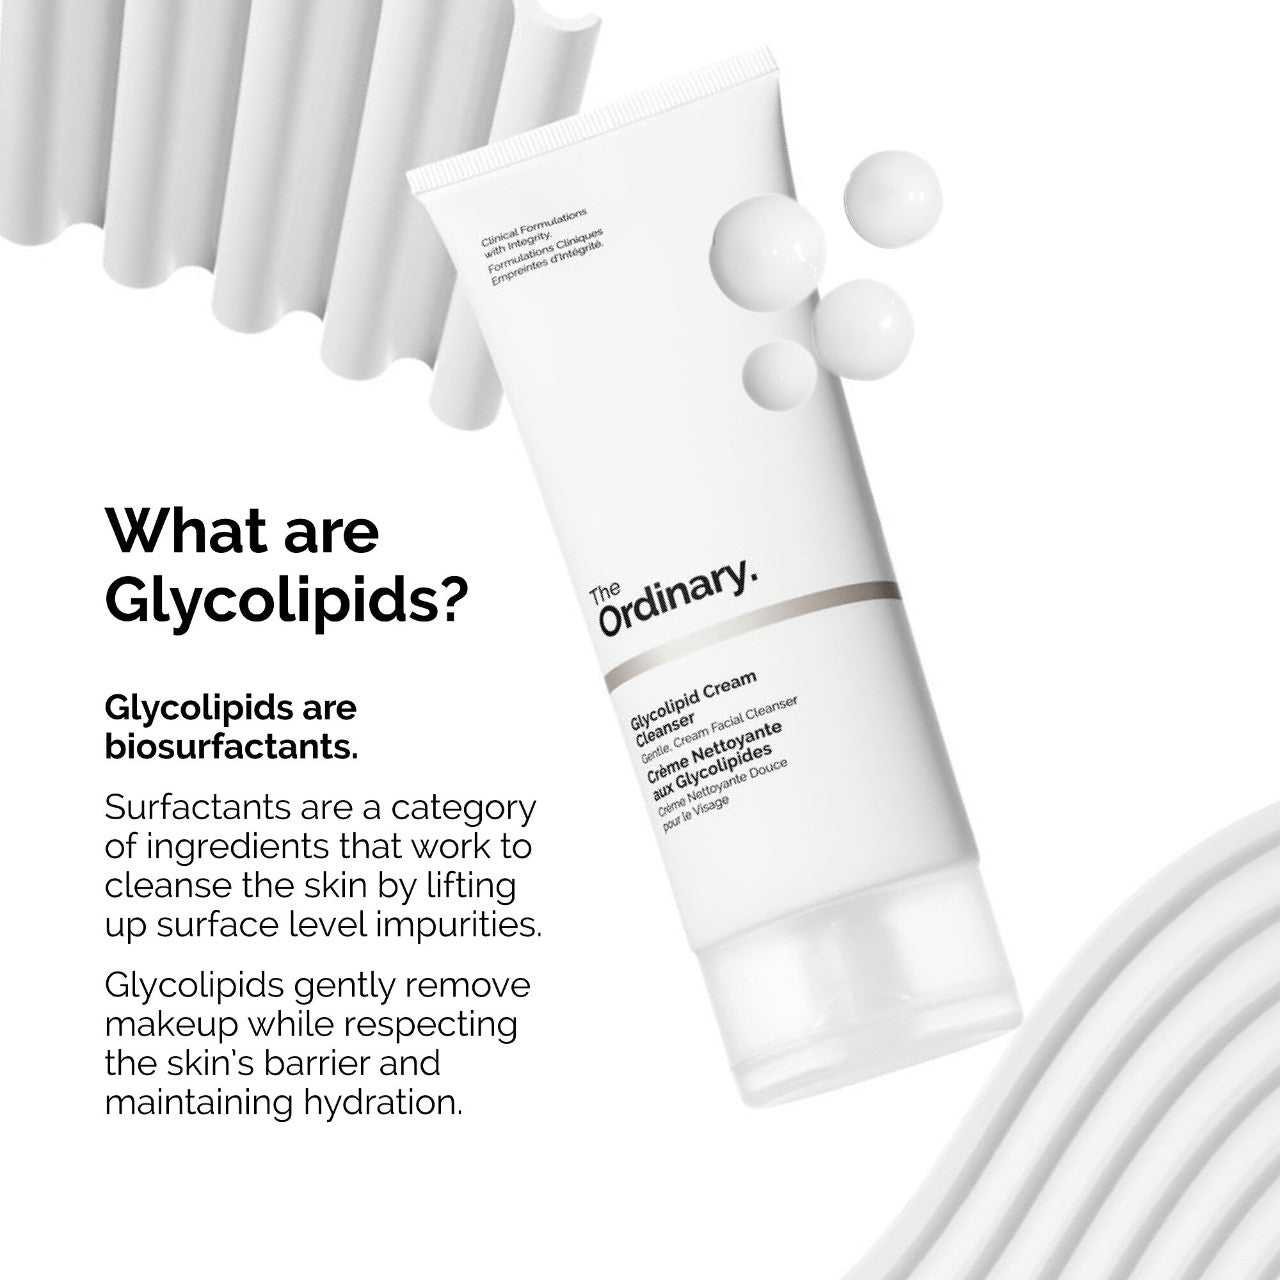 The Ordinary Glycolipid Cream Cleanser